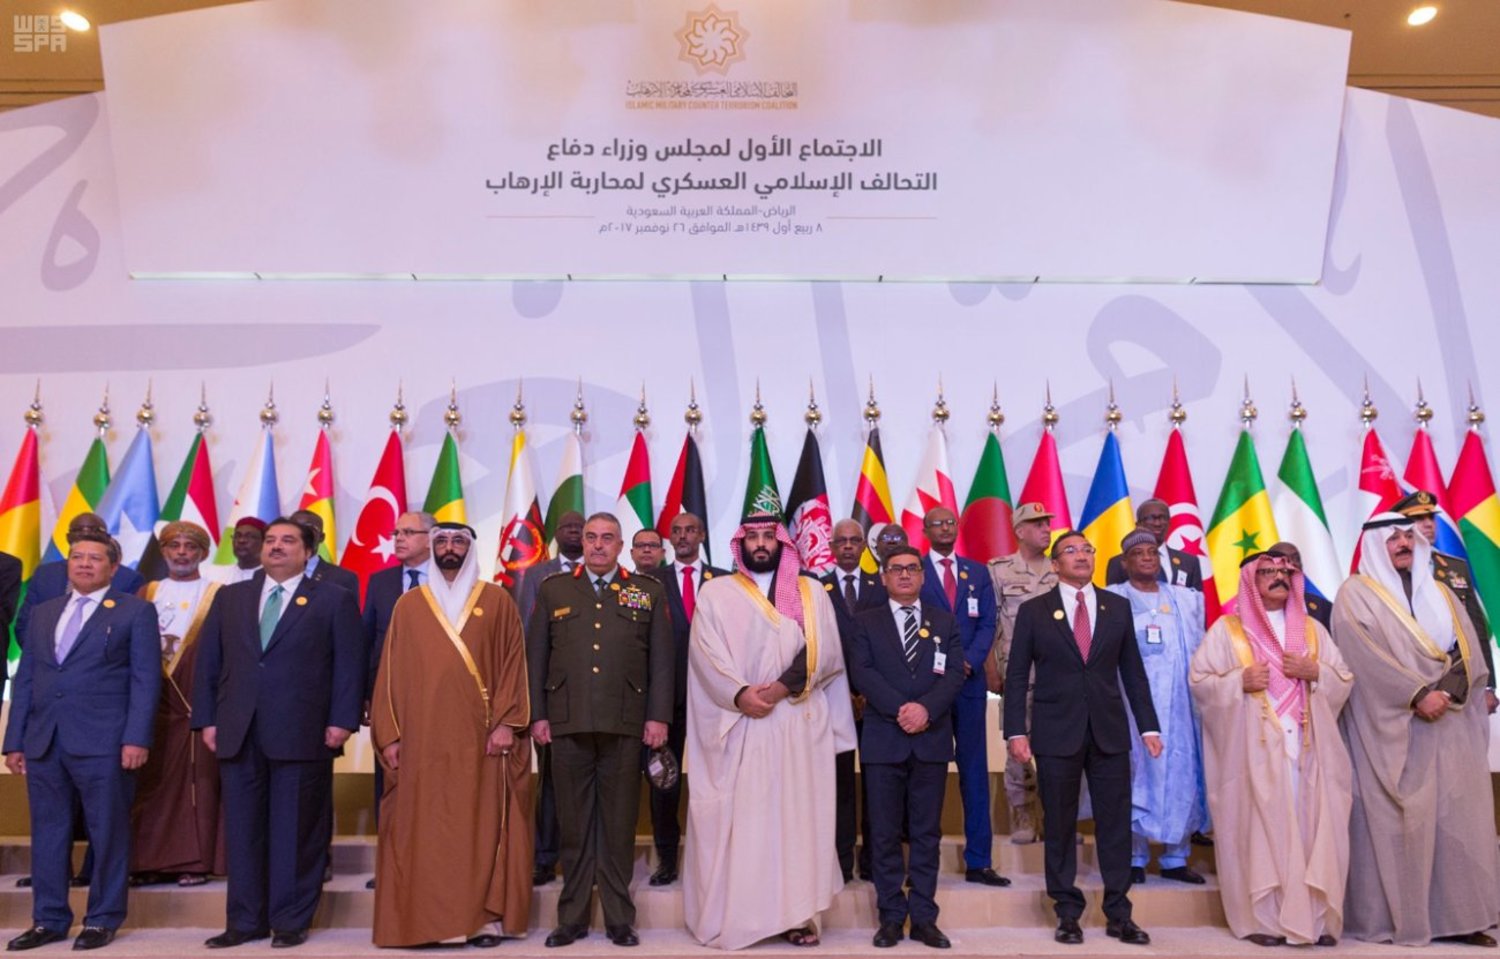 Saudi Crown Prince opens the inaugural meeting of the Islamic Military Counter Terrorism Coalition/SPA